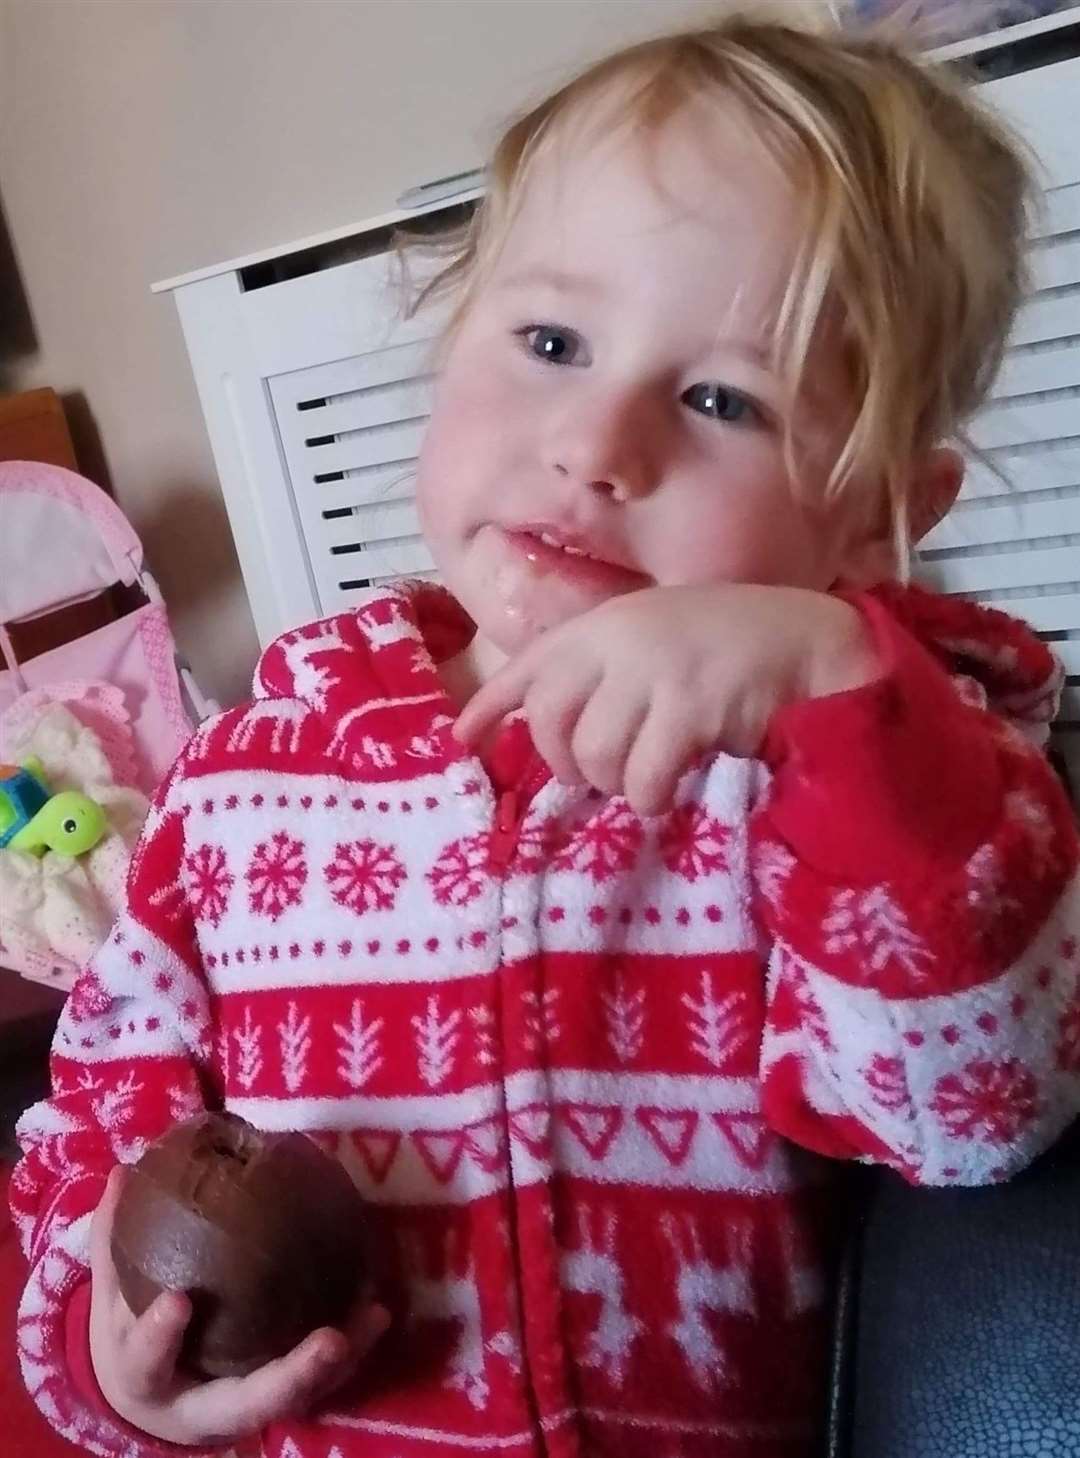 Lola James, two, died following an incident at an address in Haverfordwest (Dyfed-Powys Police)